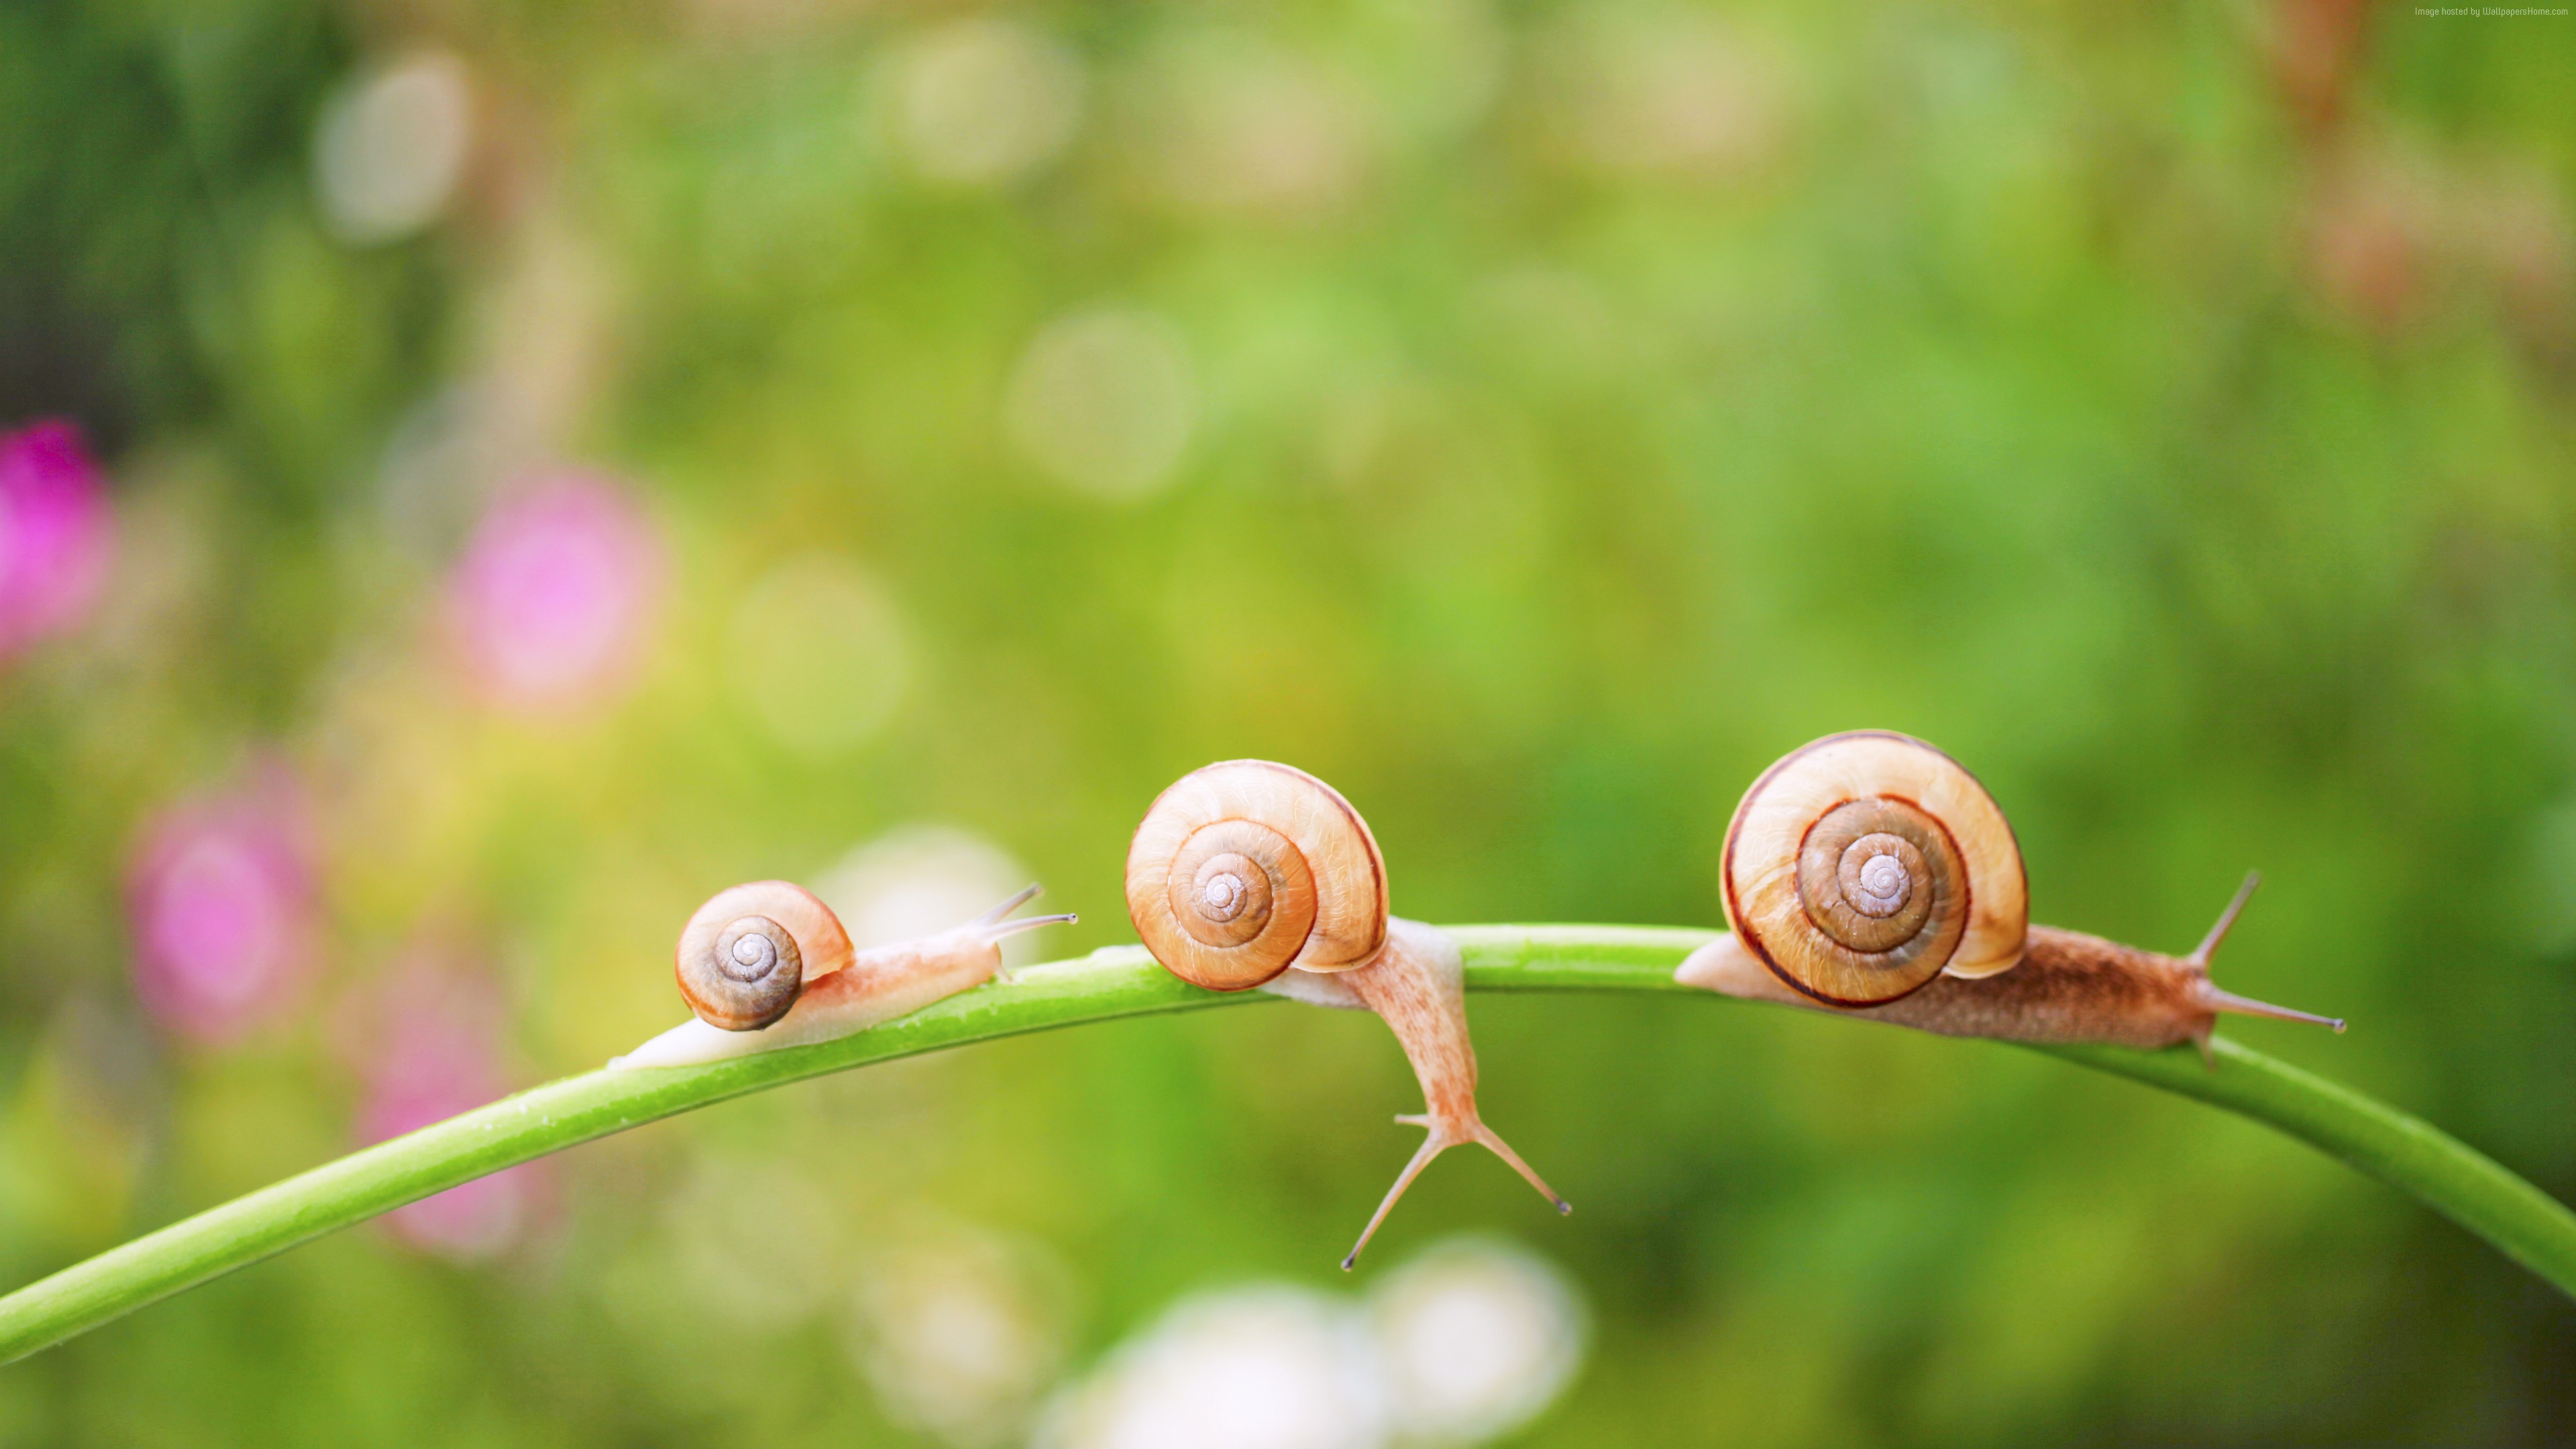 Stock Images snail, nature, sunshine, Stock Images